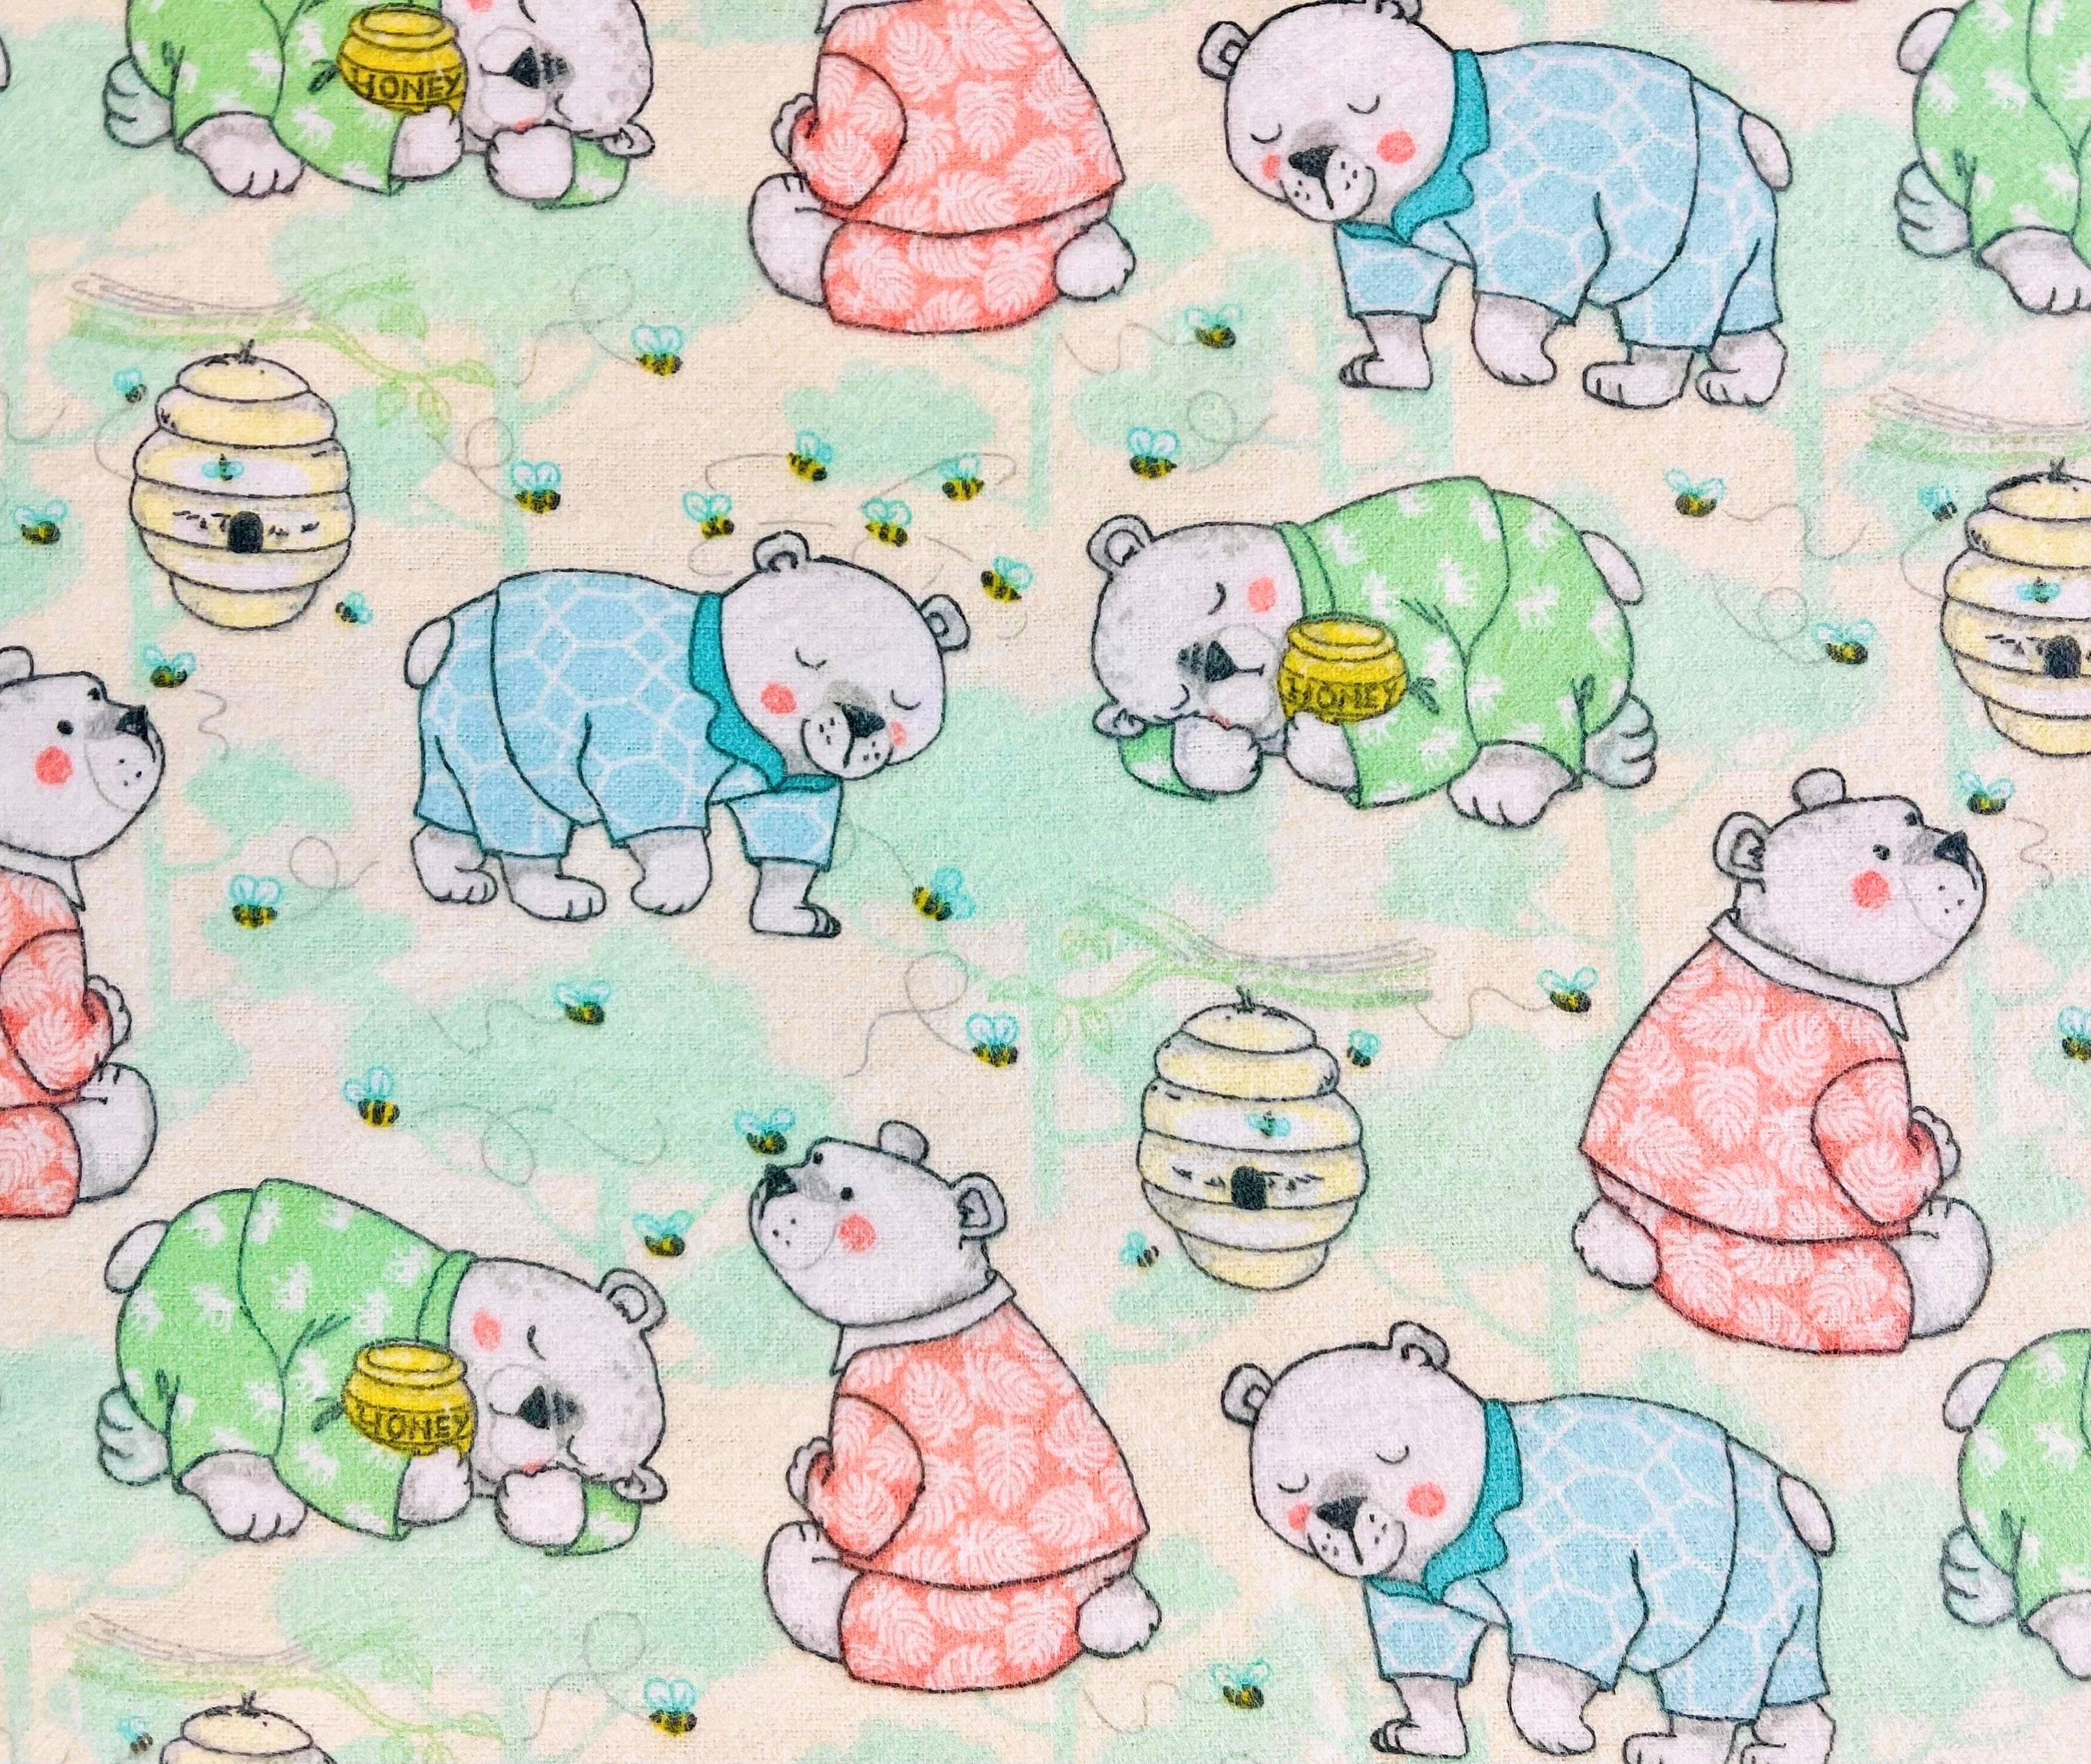 Sleeping Sheep on Clouds Flannel Fabric by the Yard or Half Yards